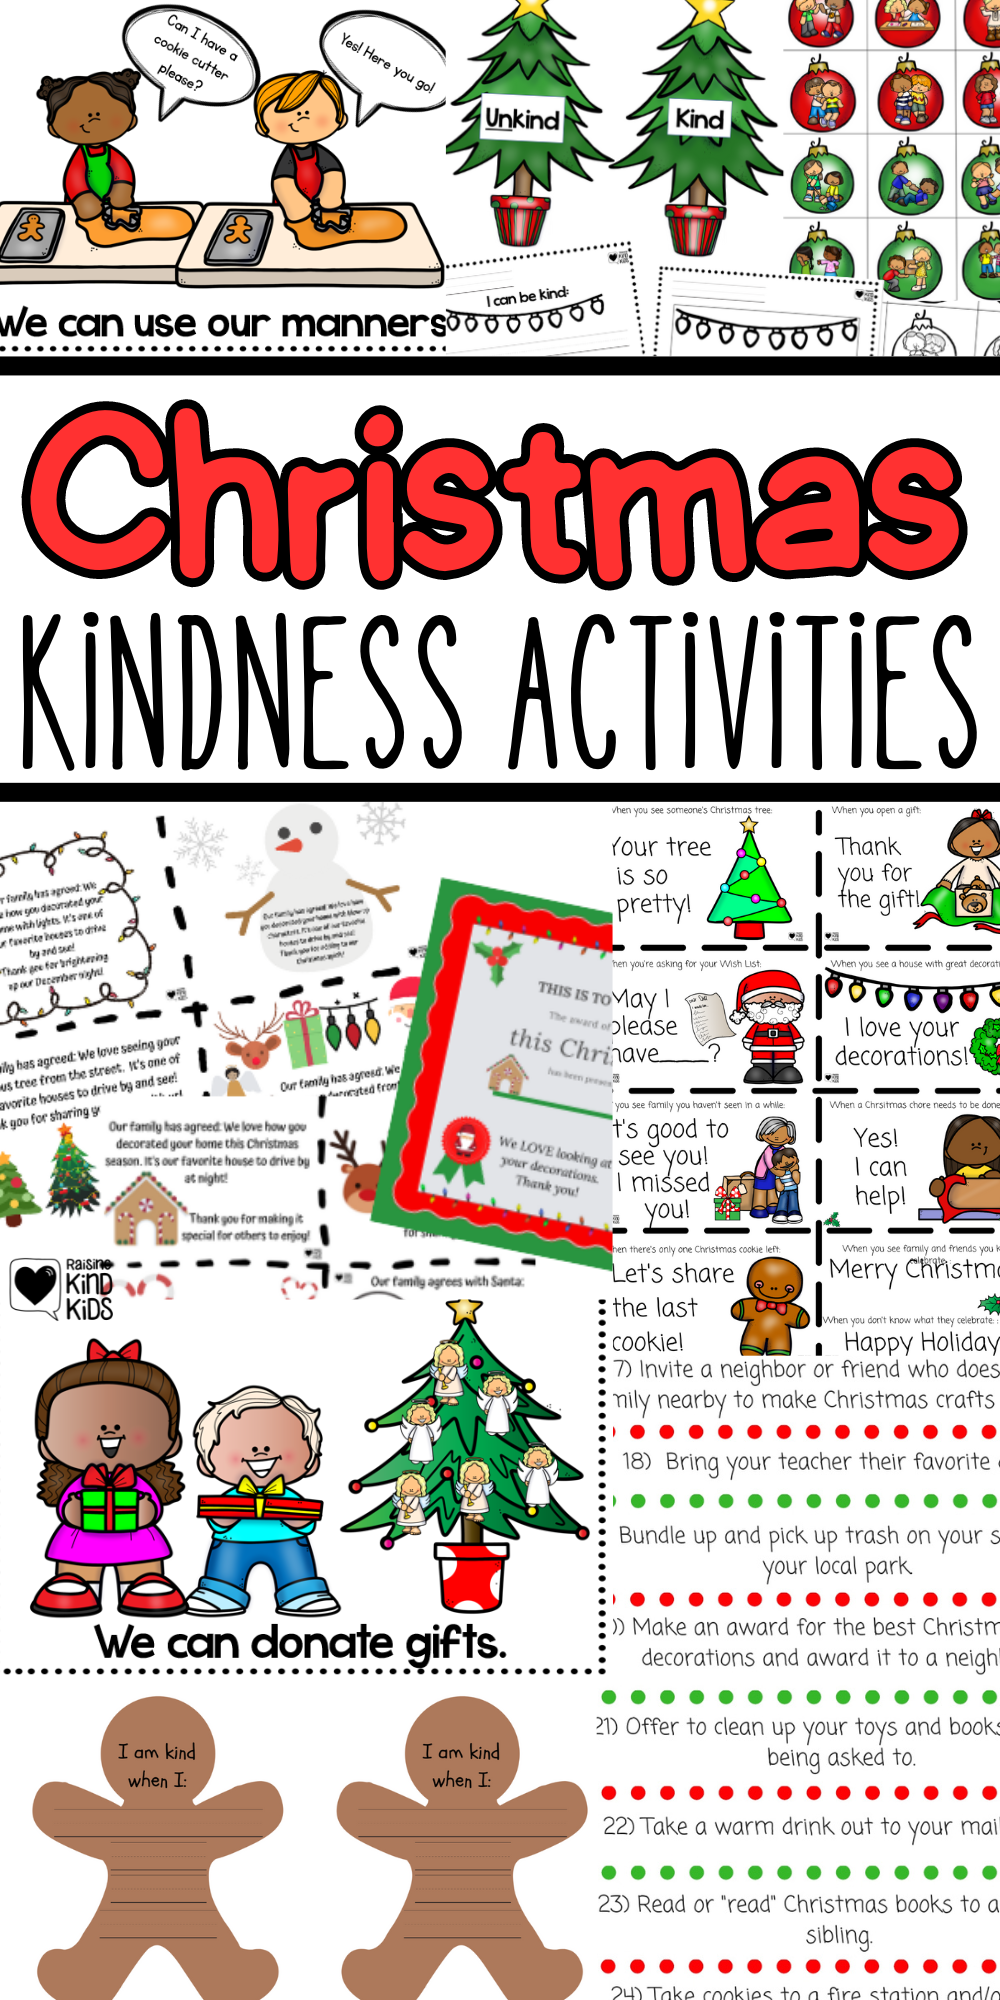 Use these Christmas kindness activities for kids to focus on and spread kindness during the December holidays. 